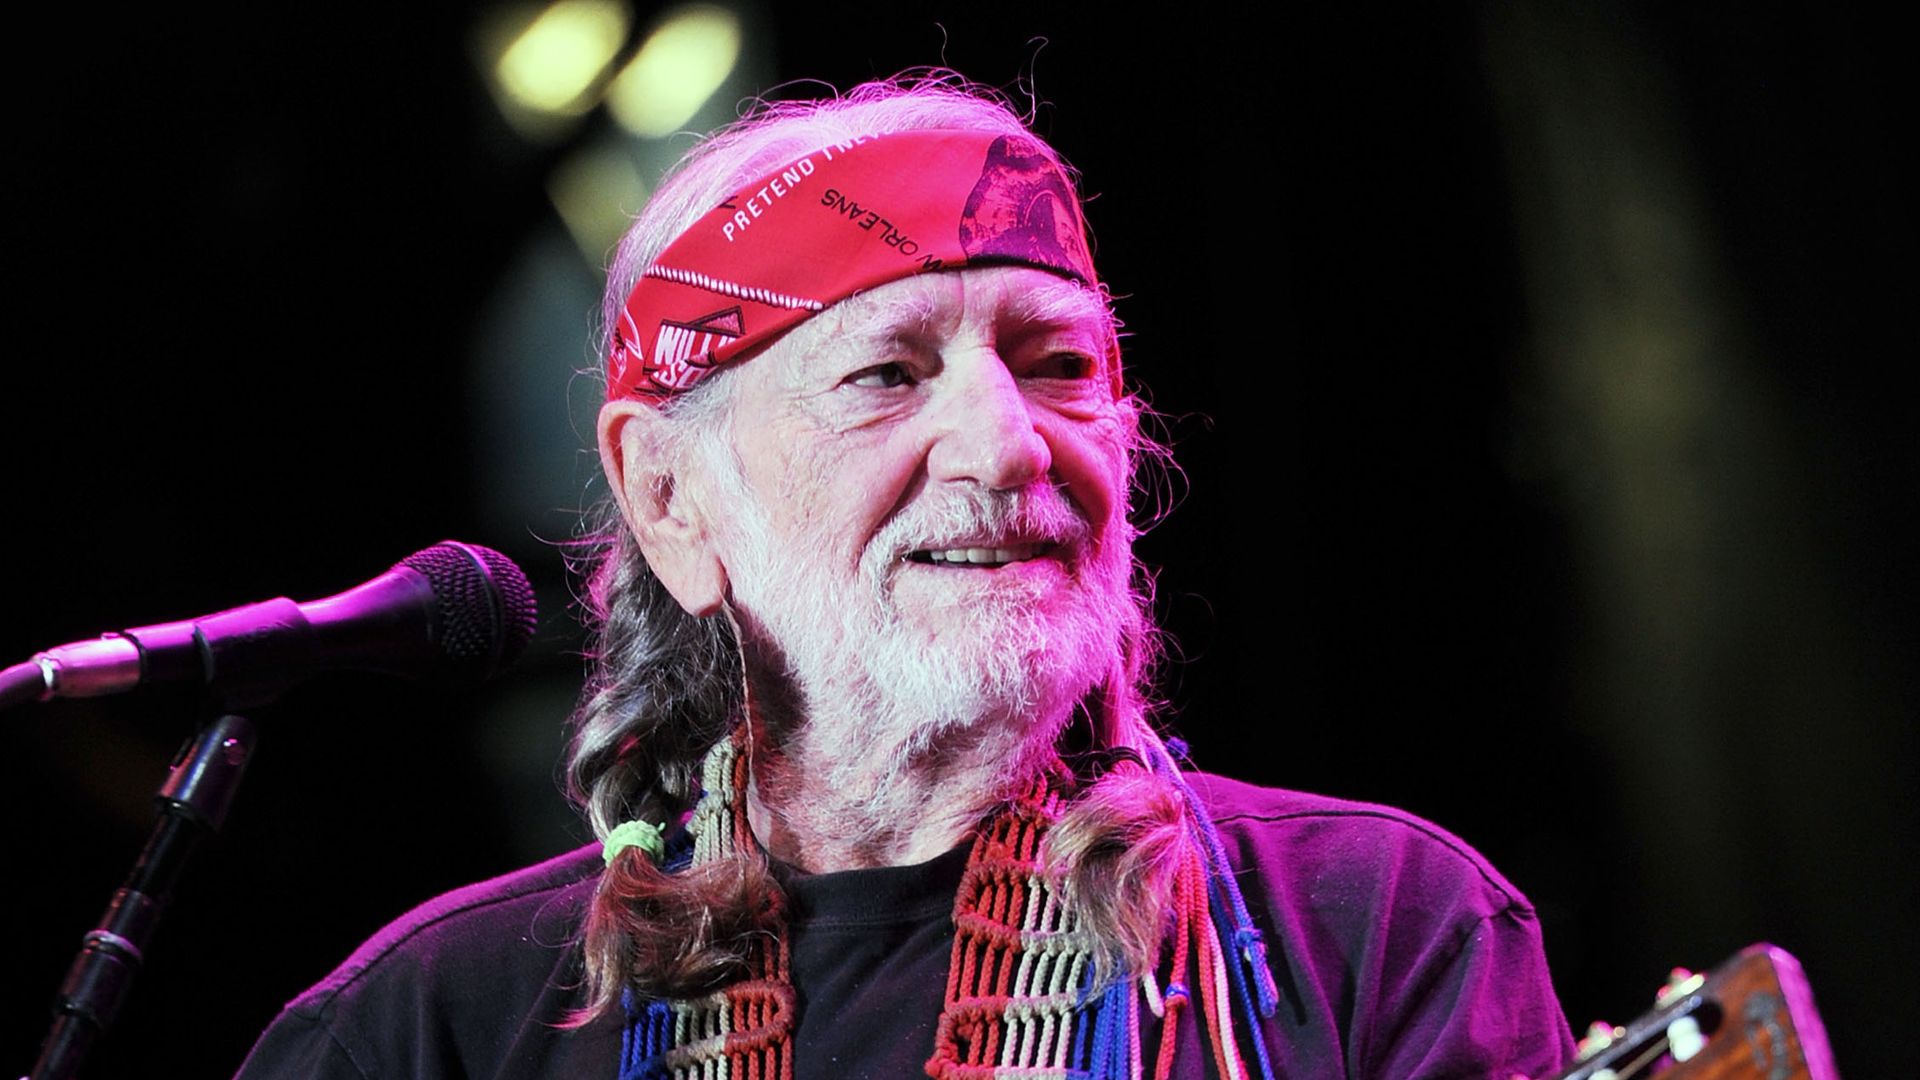 Willie Nelson performs during the First annual 2011 Rapids Jam Music Festival at the Carolina Crossroads Outdoor Amphitheate on June 16, 2011 in Roanoke Rapids, North Carolina.